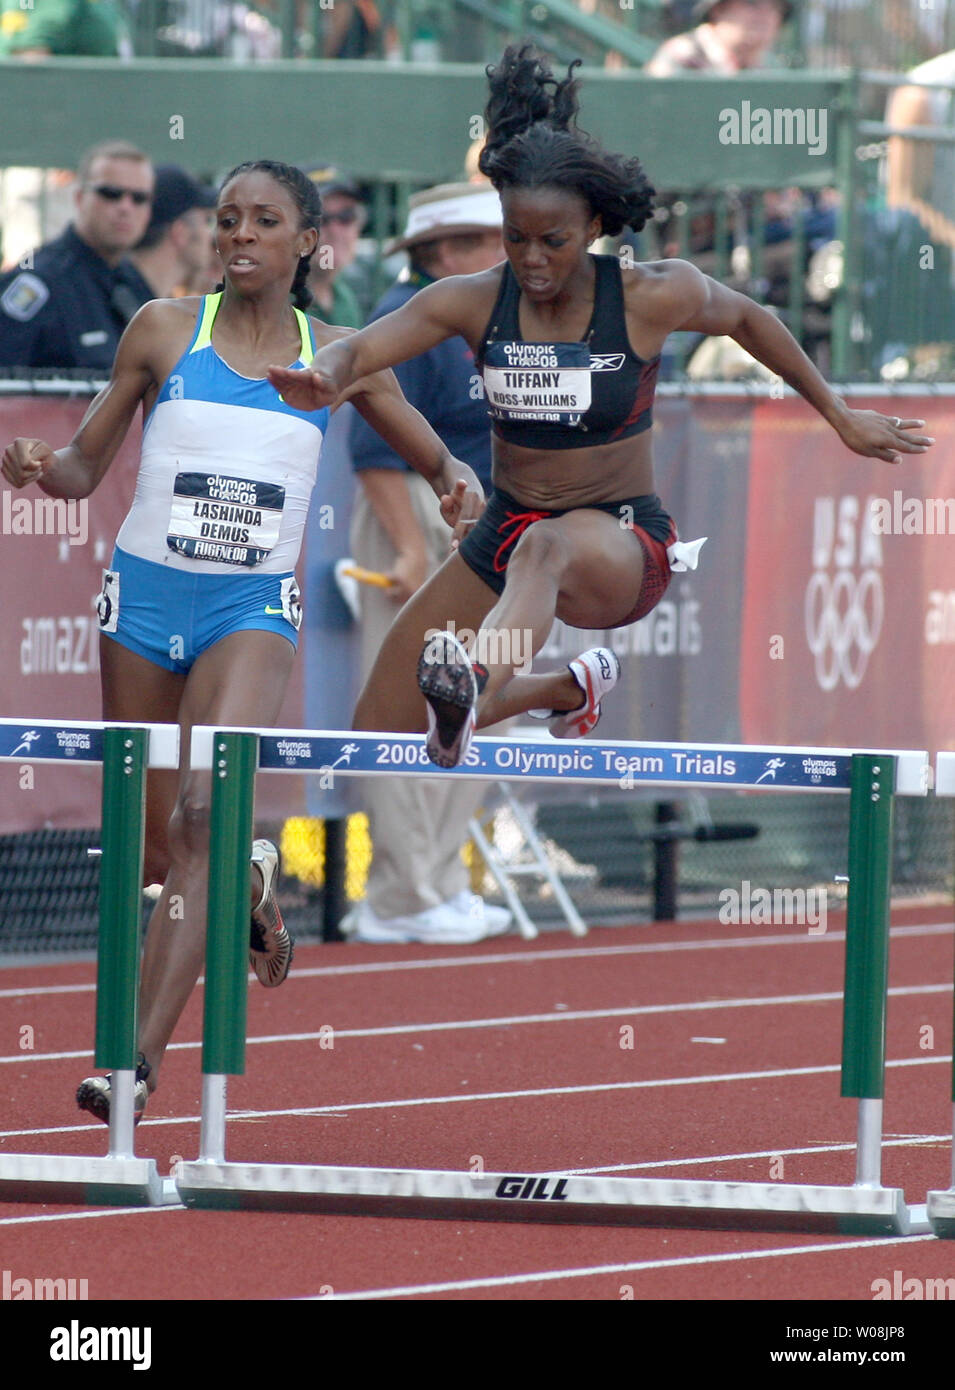 Tiffany Ross-Williams clears the last hurdle en route to winning the 400 Meter hurdles at the U.S. track and field Olympic trials in Eugene, Oregon on June 29, 2008. Ross-Wiliams ran a 54.03 to win and make the U.S. Olympic team.   (UPI Photo/Terry Schmitt) Stock Photo